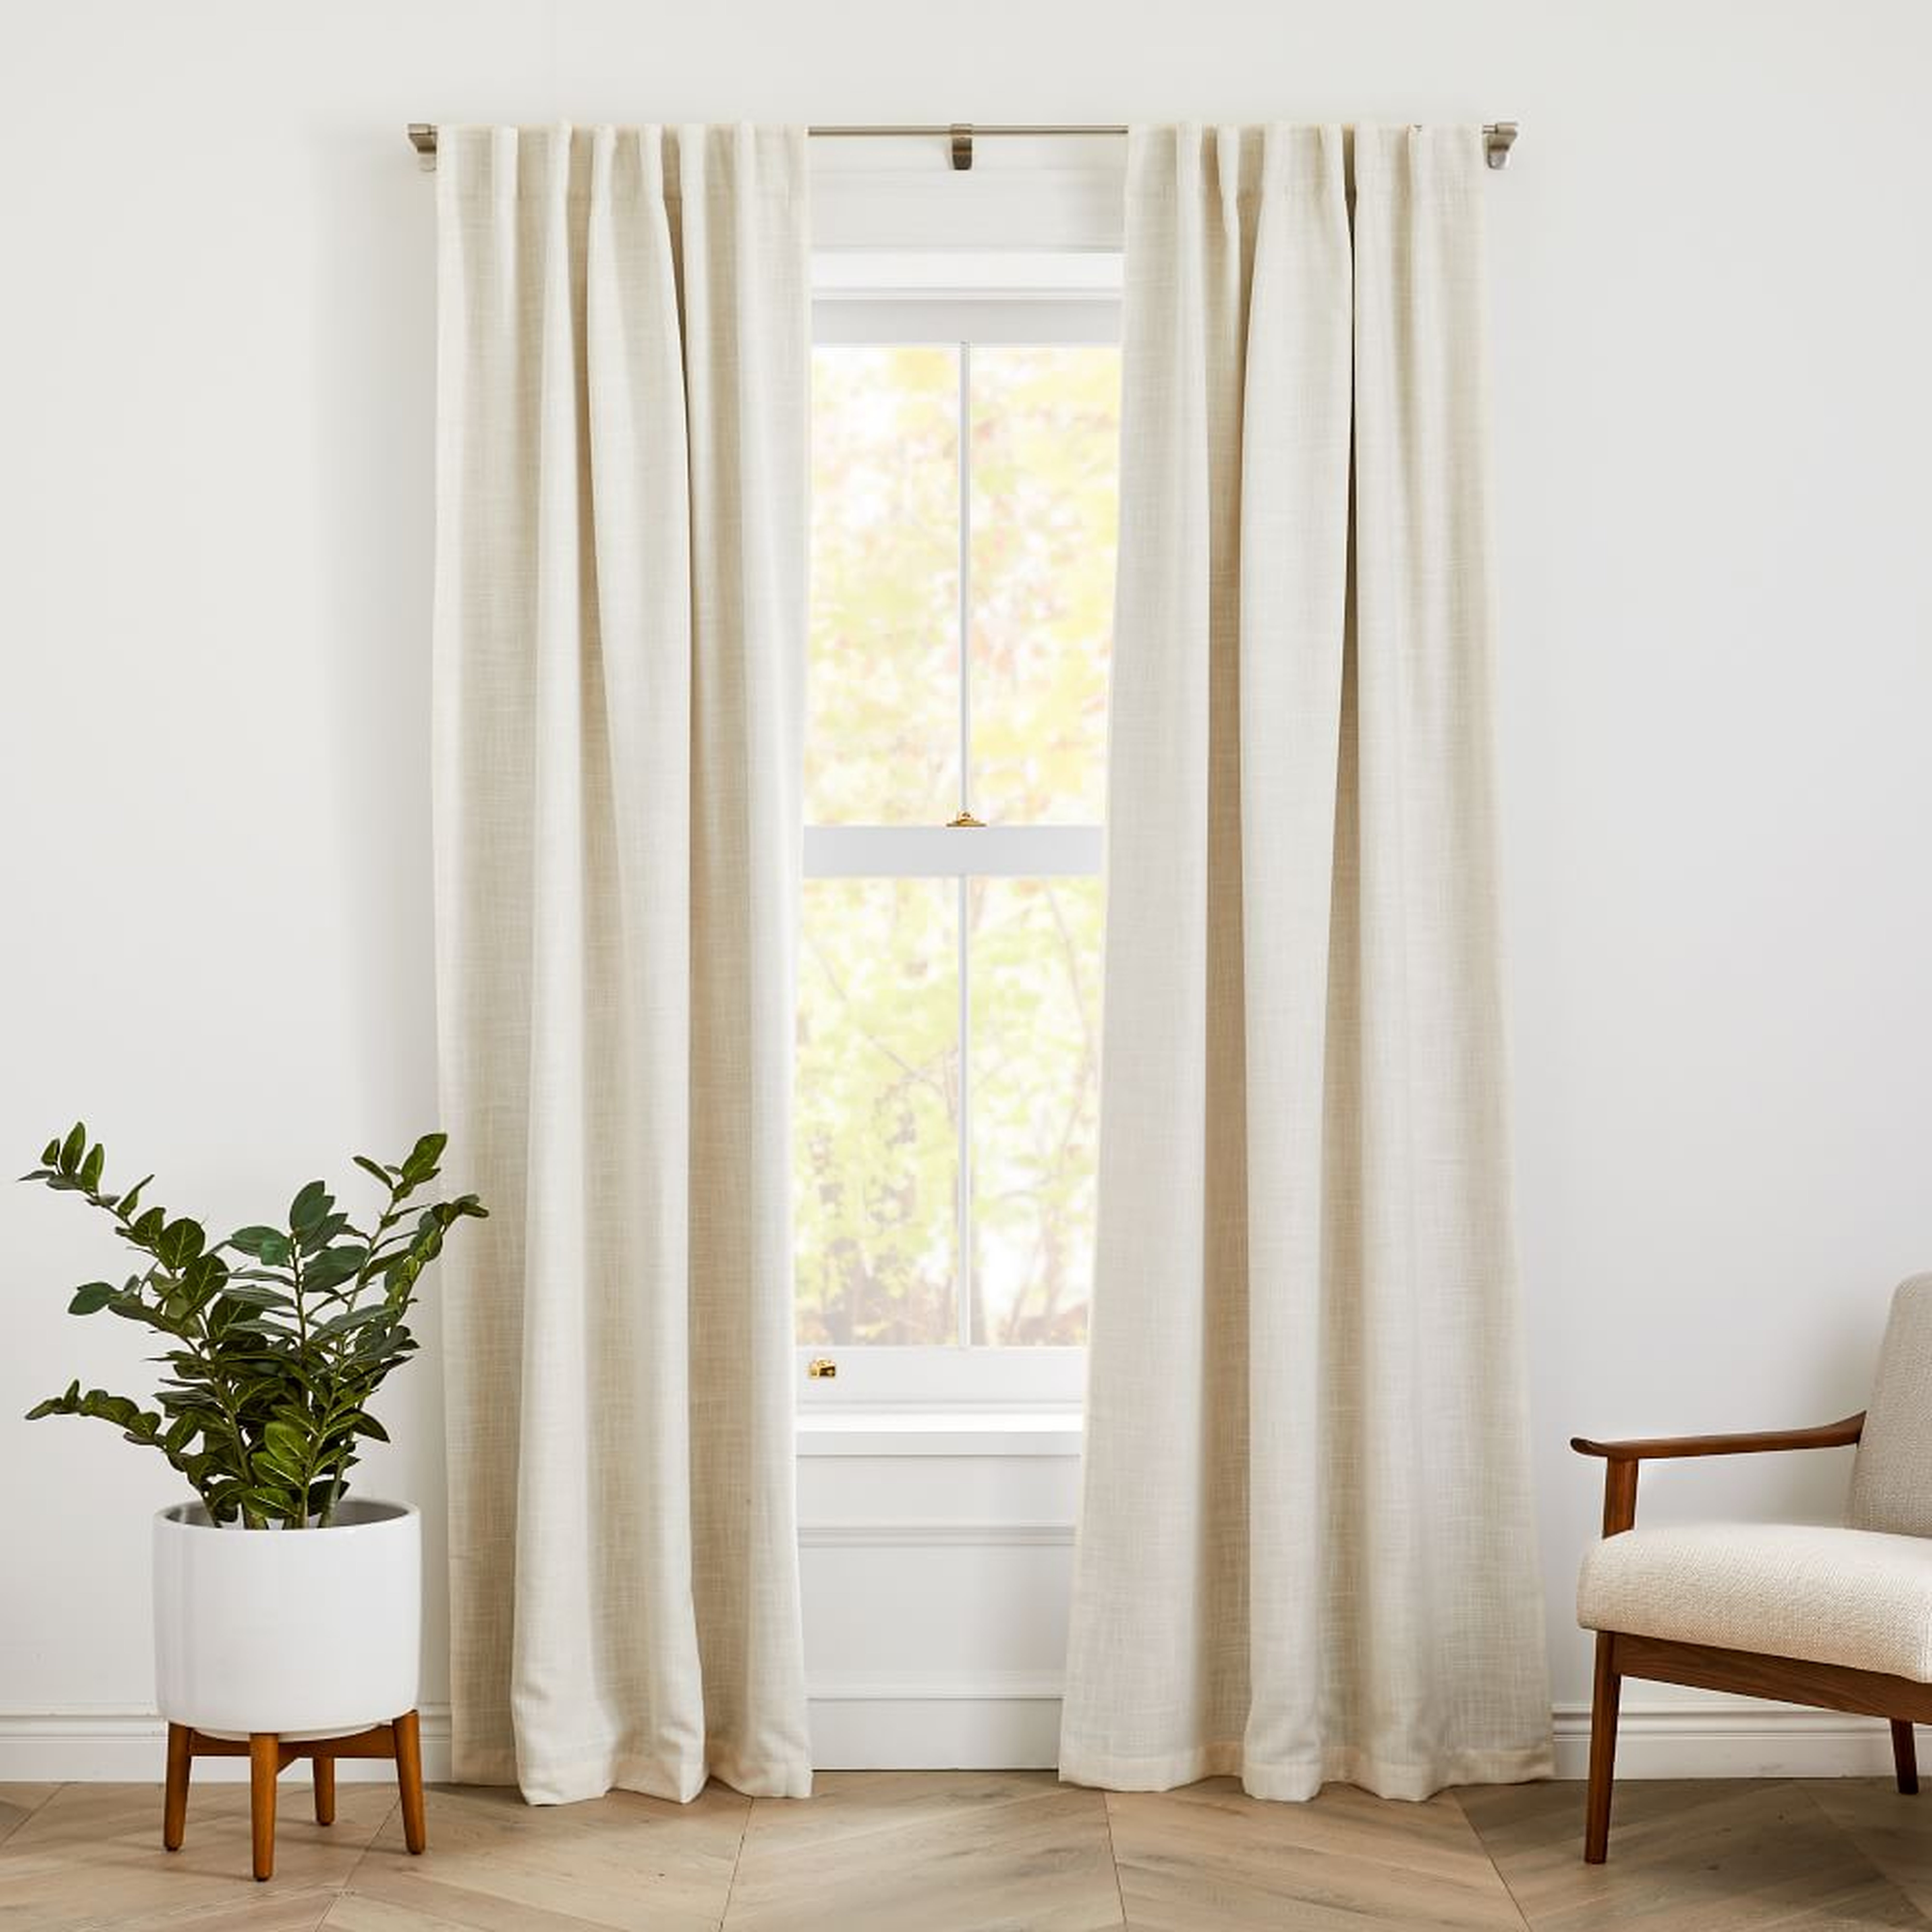 Crossweave Curtain with Blackout Lining, Natural Canvas, 48"x96", Set of 2 - West Elm